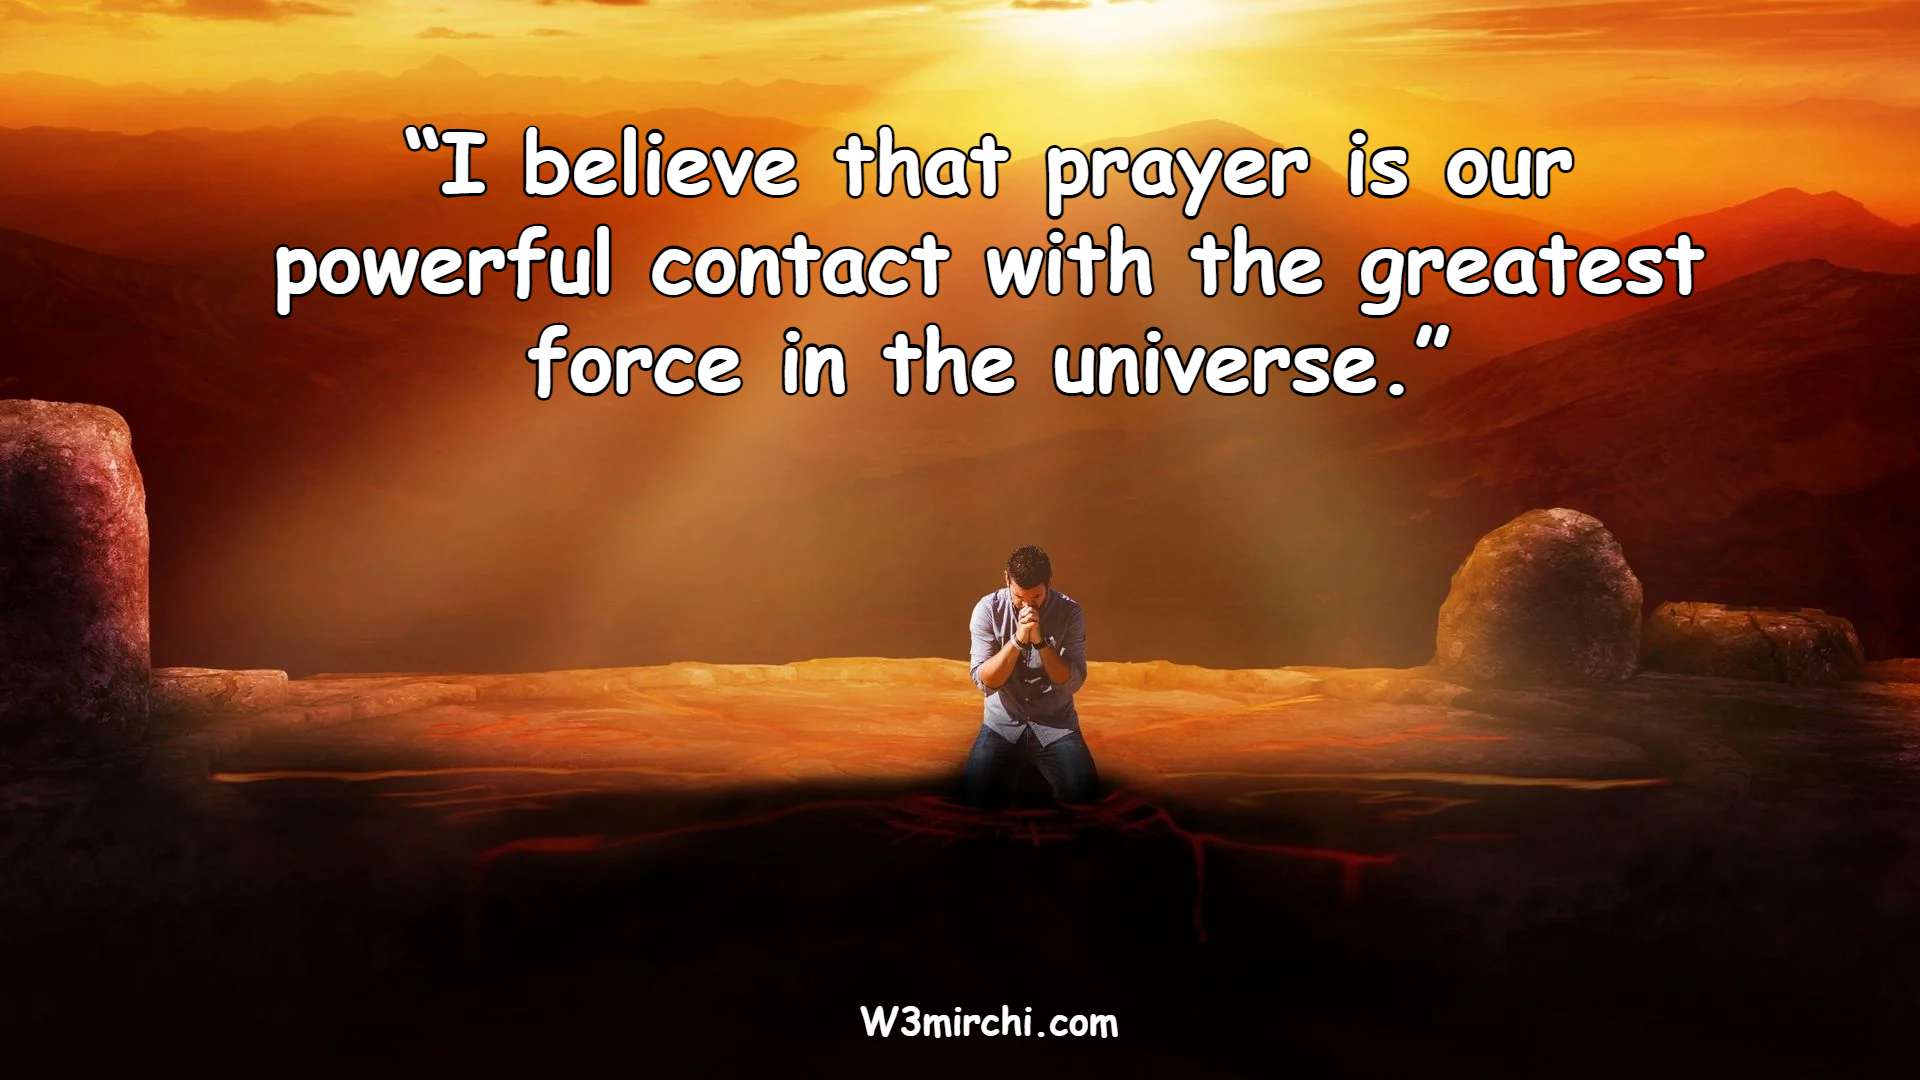 “I believe that prayer is our powerful